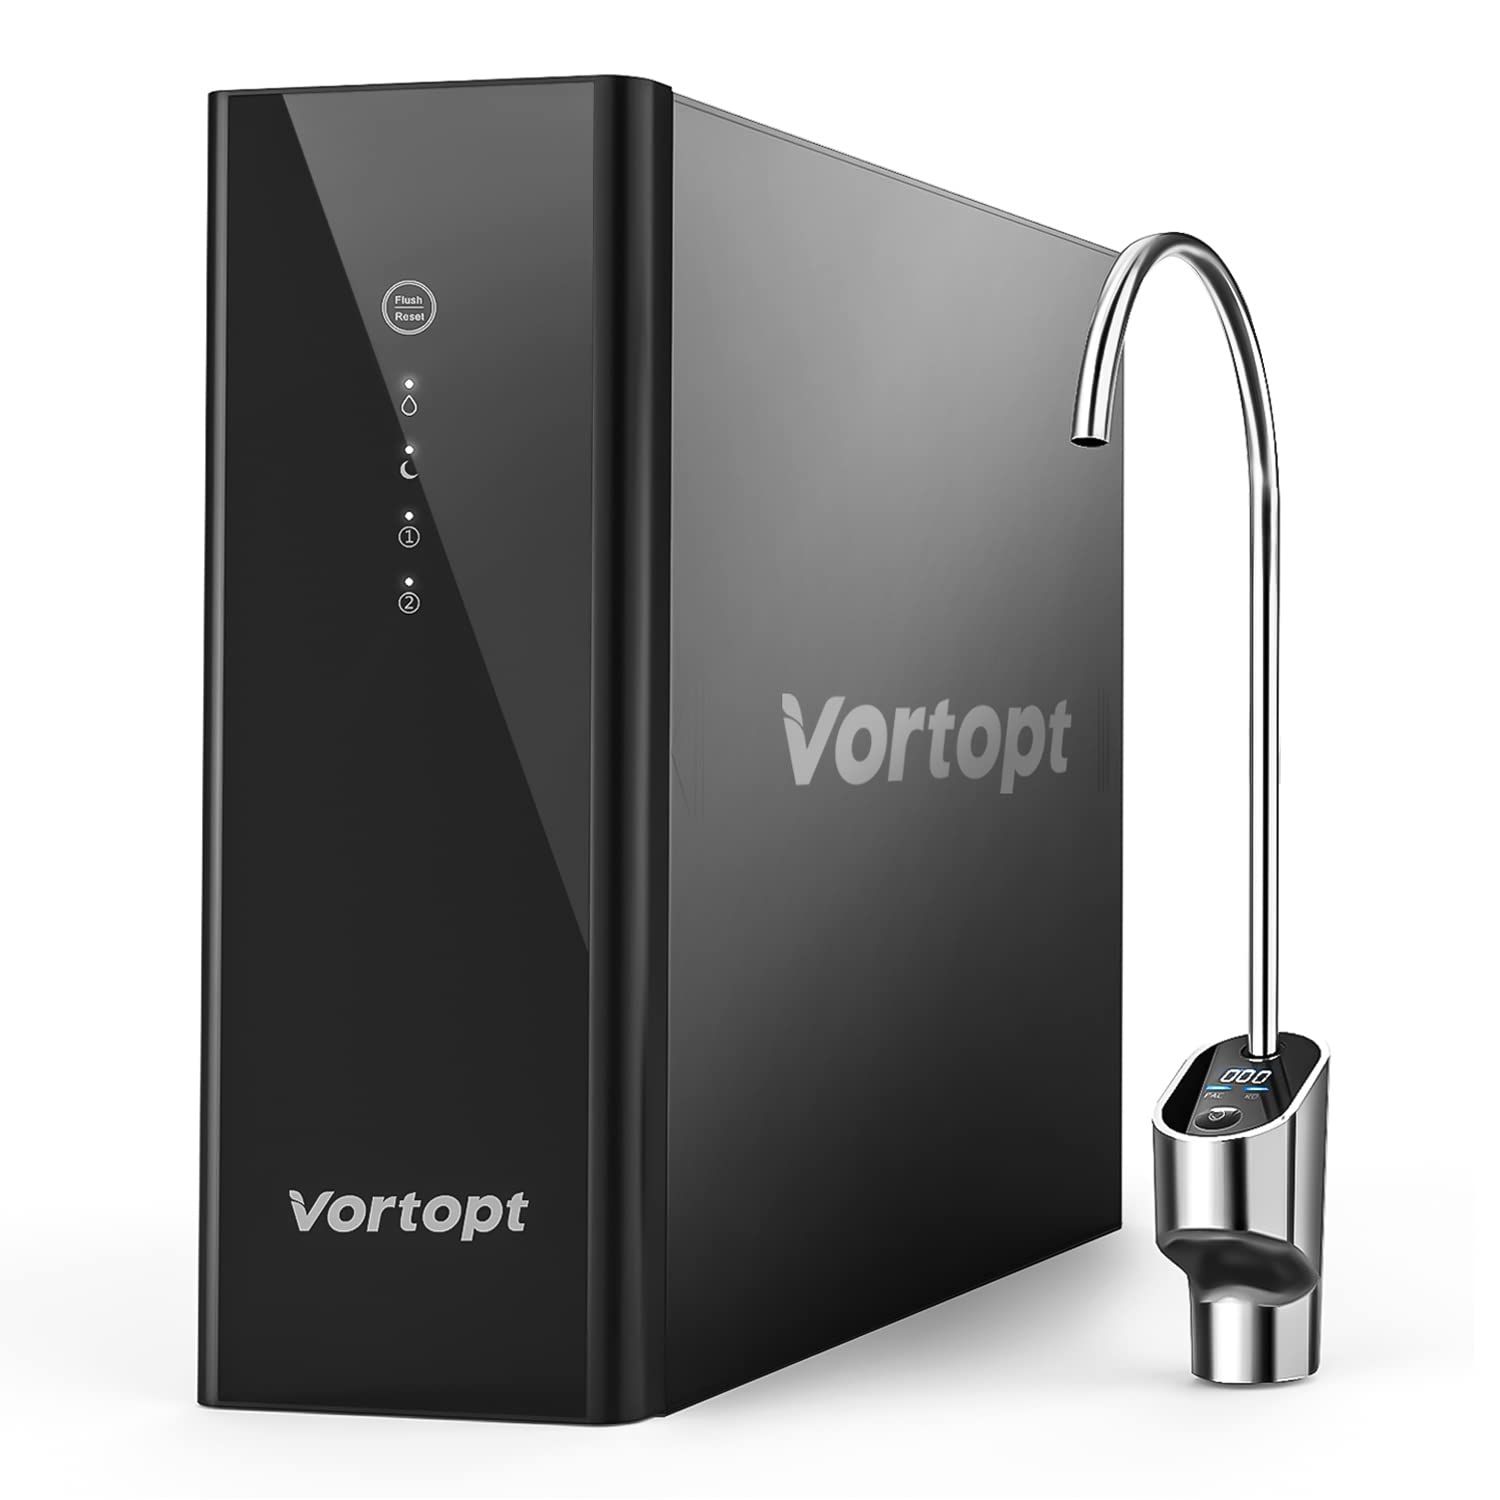 Vortopt Reverse Osmosis System Water Filter - 1000GPD Under Sink Water Purifier 3:1 Pure to Drain, Tankless RO Water Filter System, 0.0001um Purification for Drinking, Reduces TDS, Smart Faucet, Black